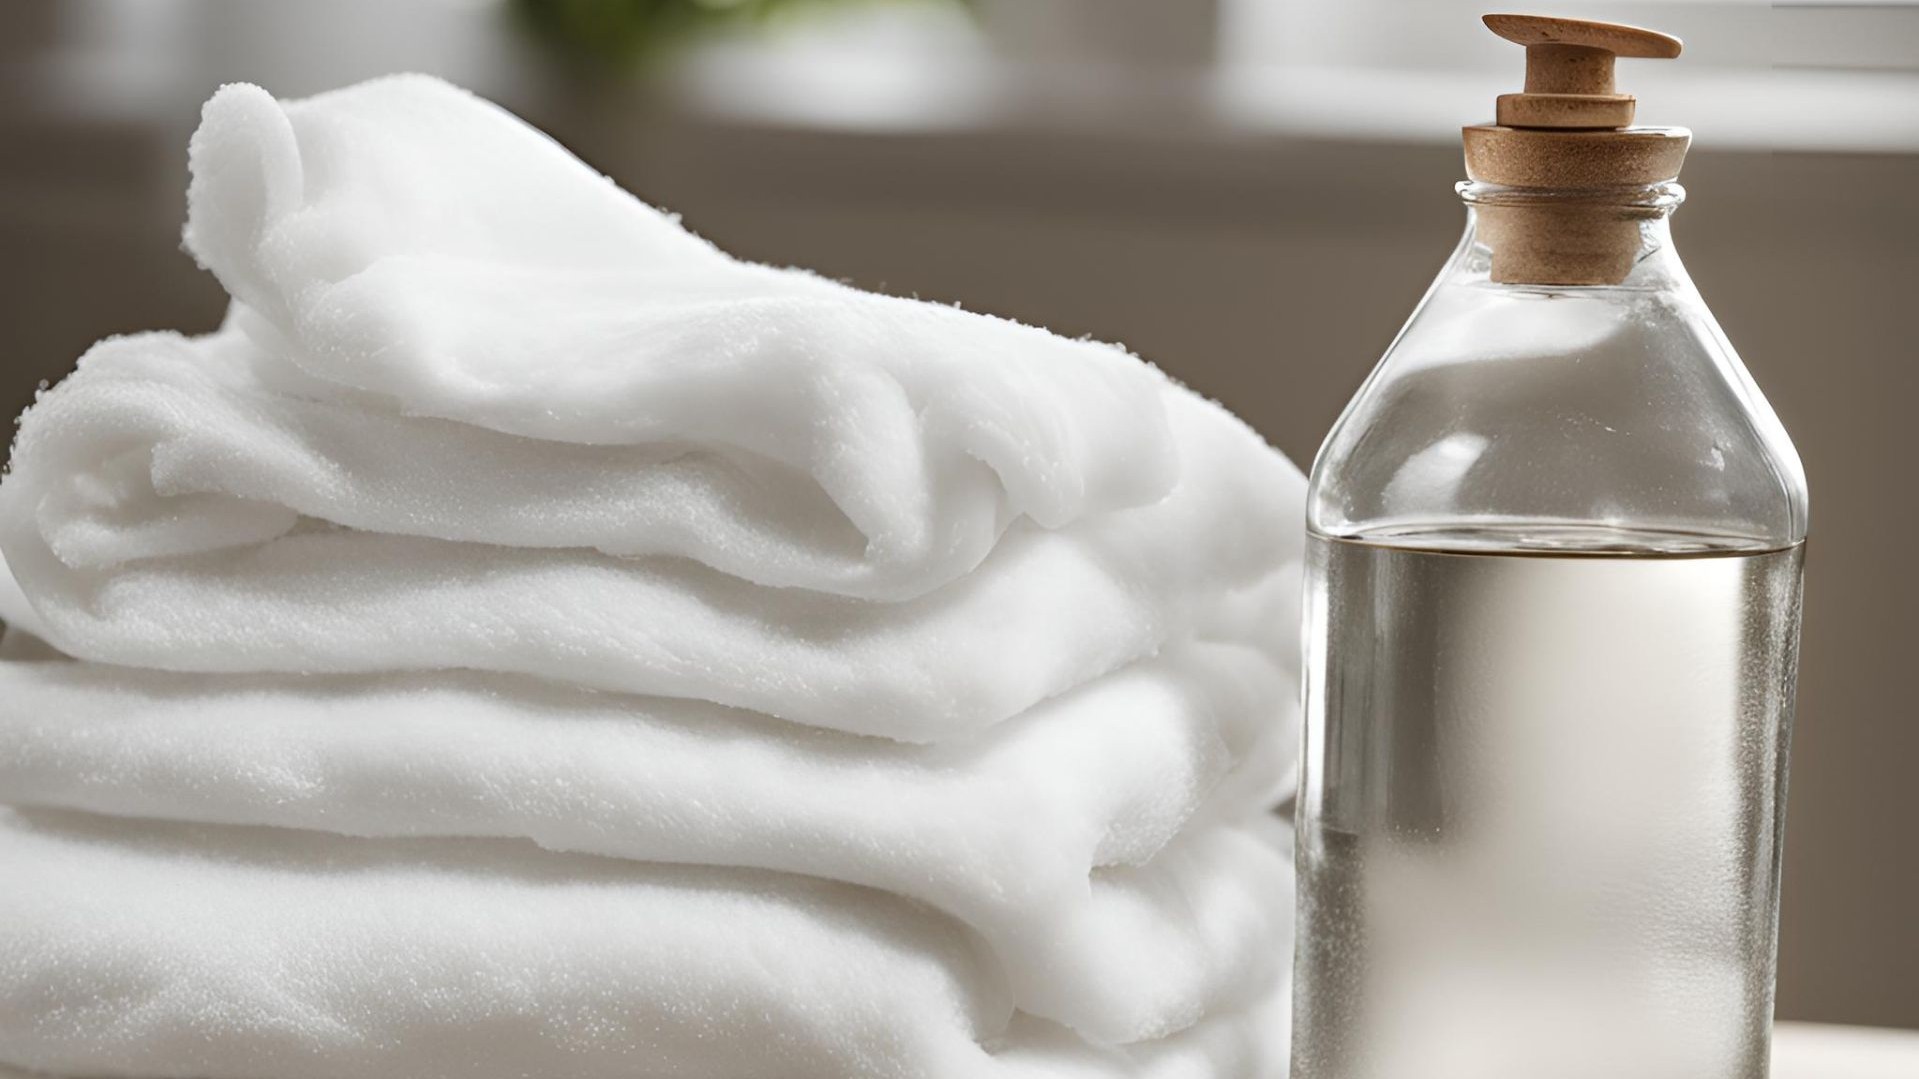 How to Make Clothes Smell Good White Vinegar as a Fabric Softener